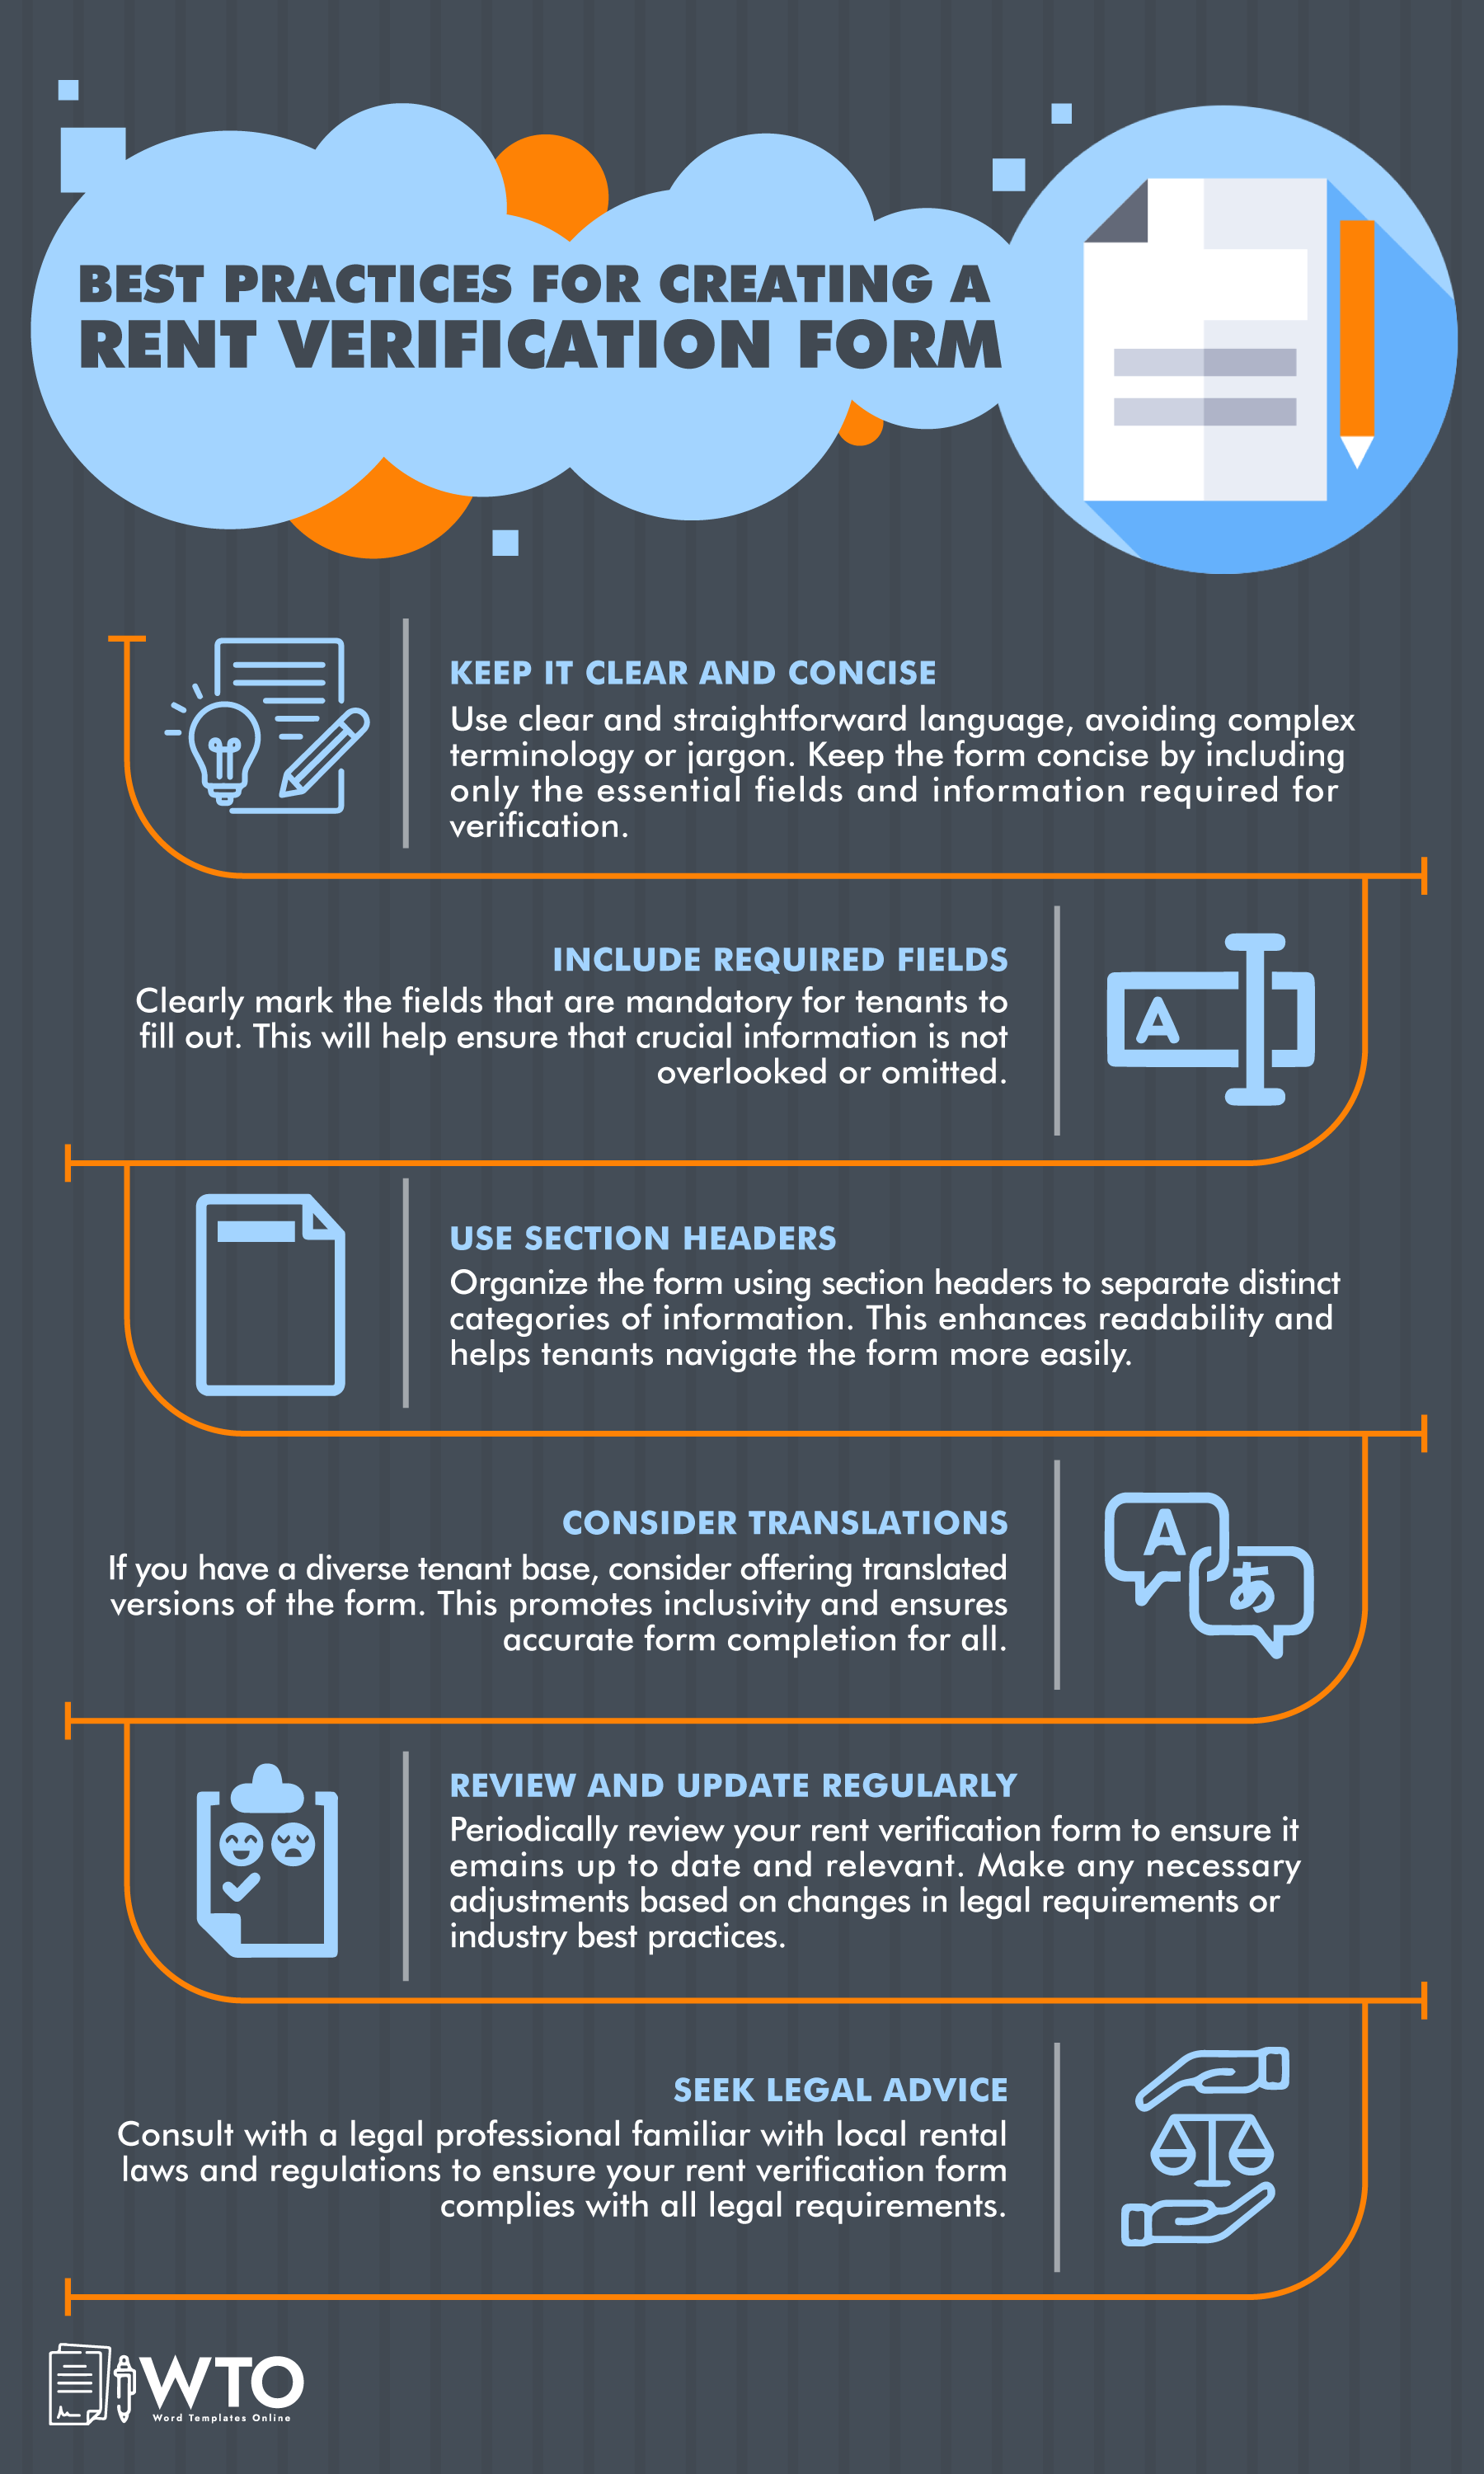 This infographic is about the best practices for creating a rent verification form.